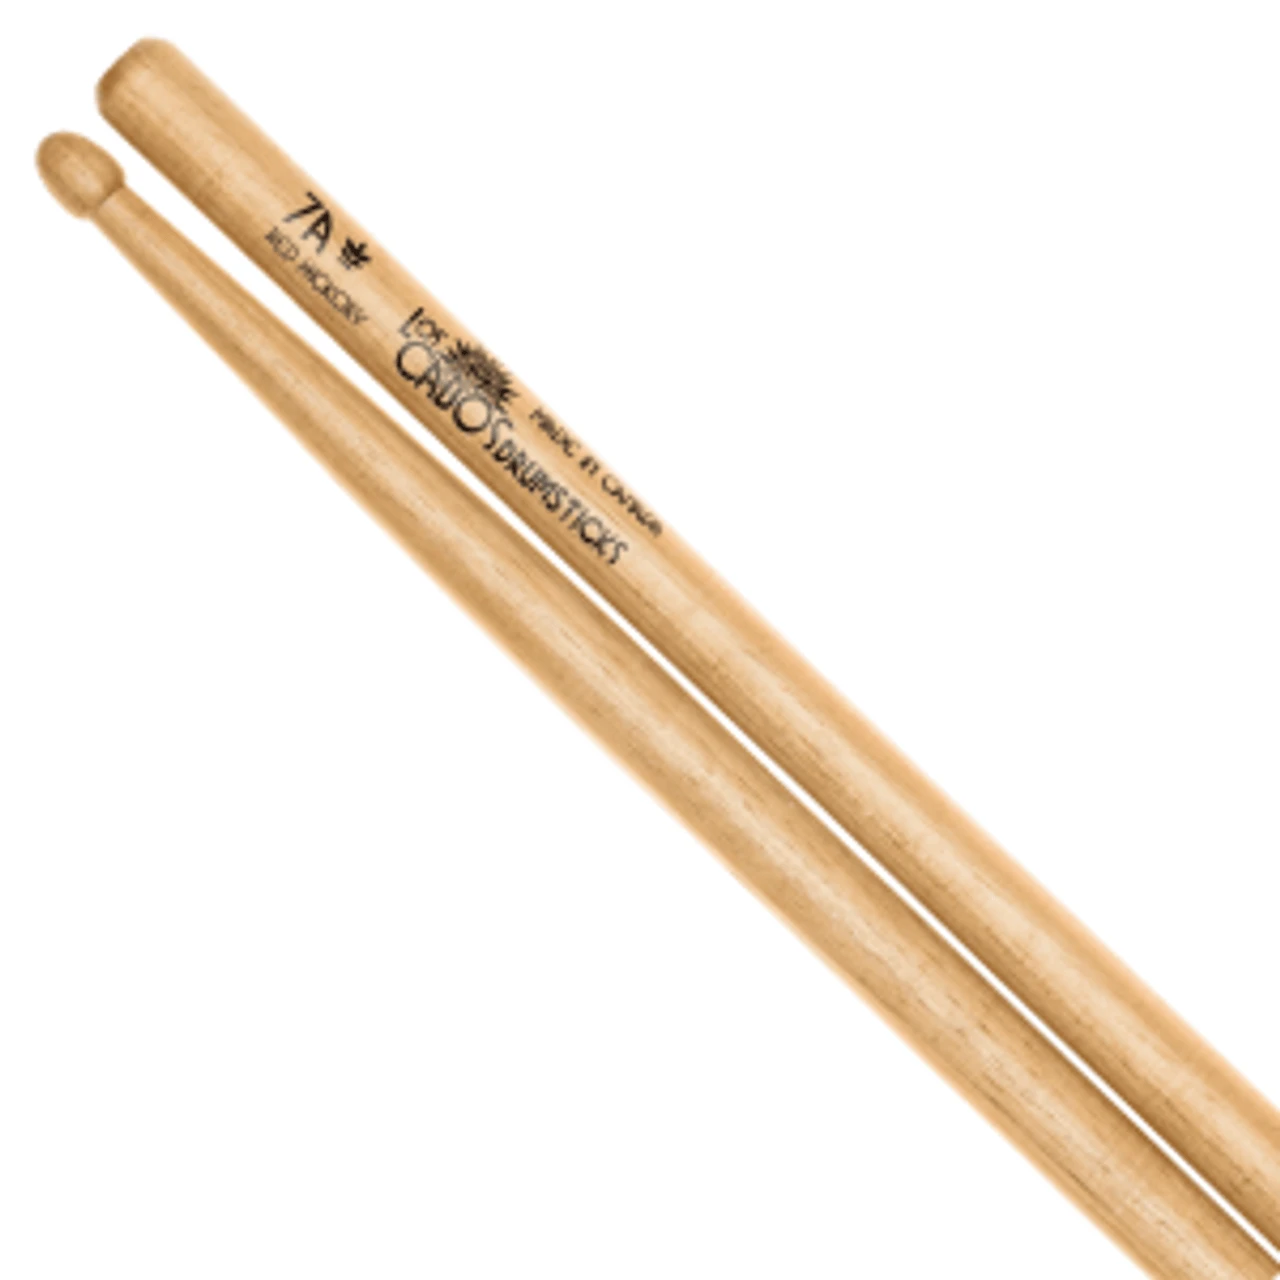 Los Cabos Drumstick 7A Red Hickory Wood Tip